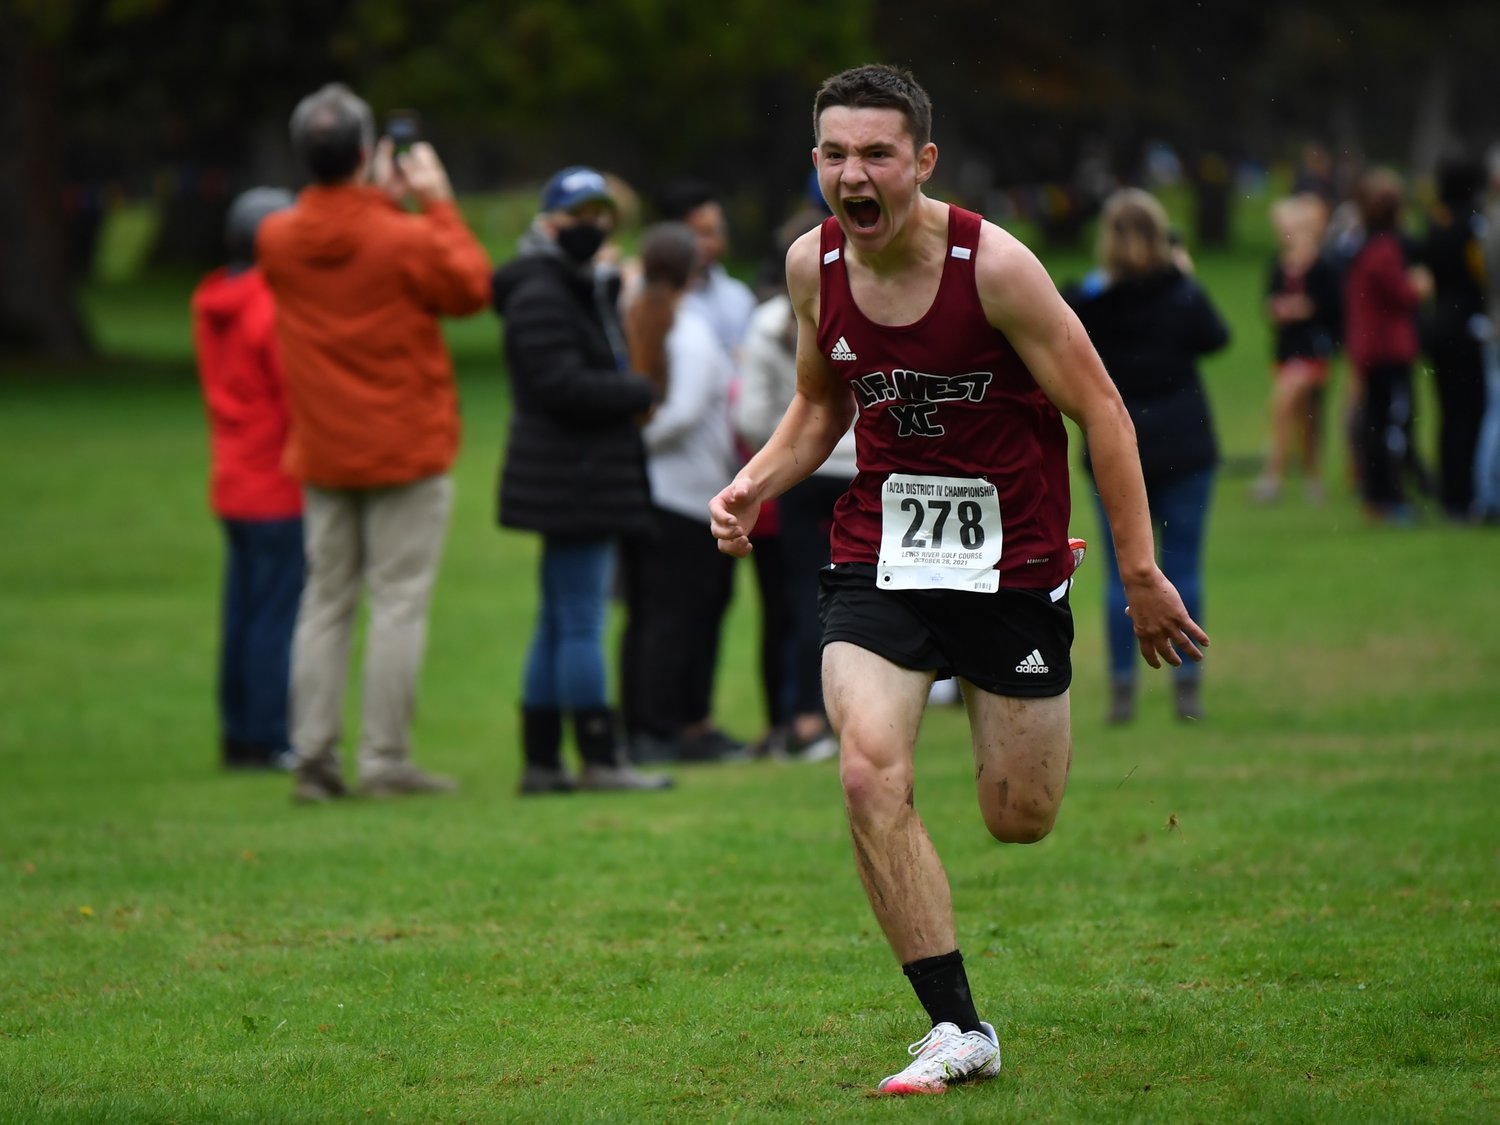 W.F. West senior Jayden Haga lets out a yell as he finishes his race at the District 4 Cross Country Championships Oct. 28.